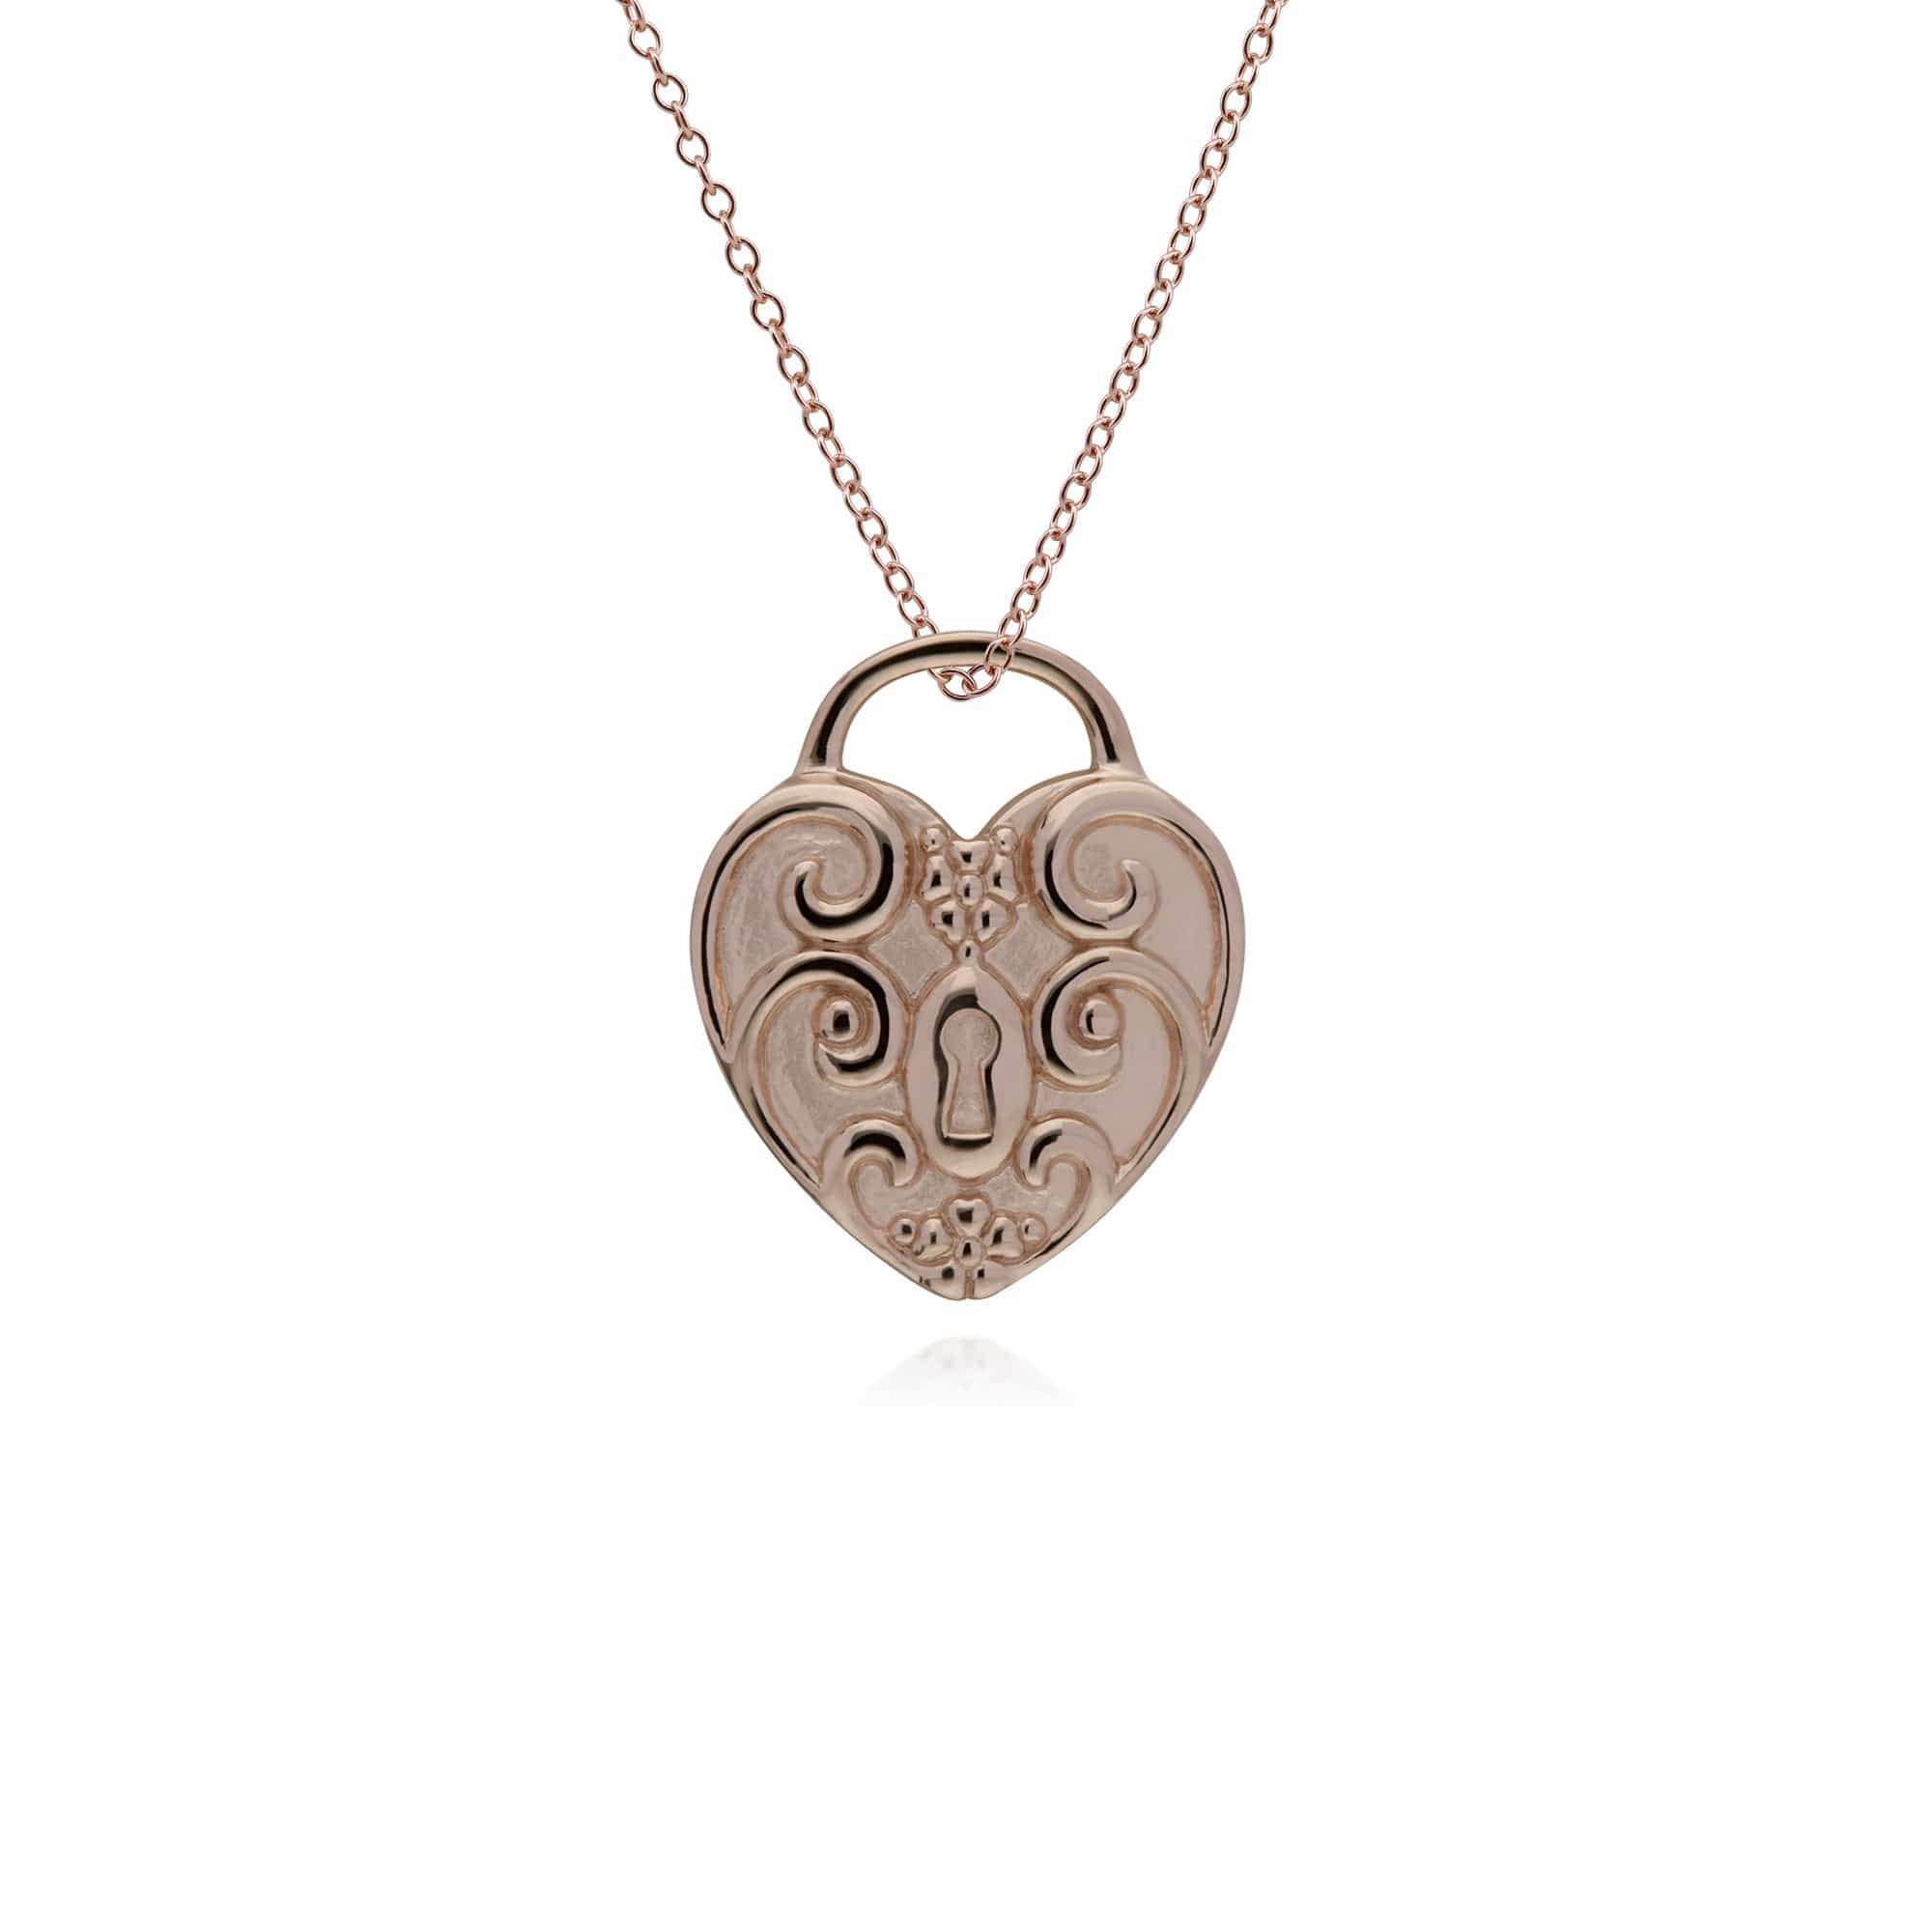 Classic Rose Gold Plated Swirled Heart Padlock Charm Pendant in 925 Sterling Silver - Gemondo